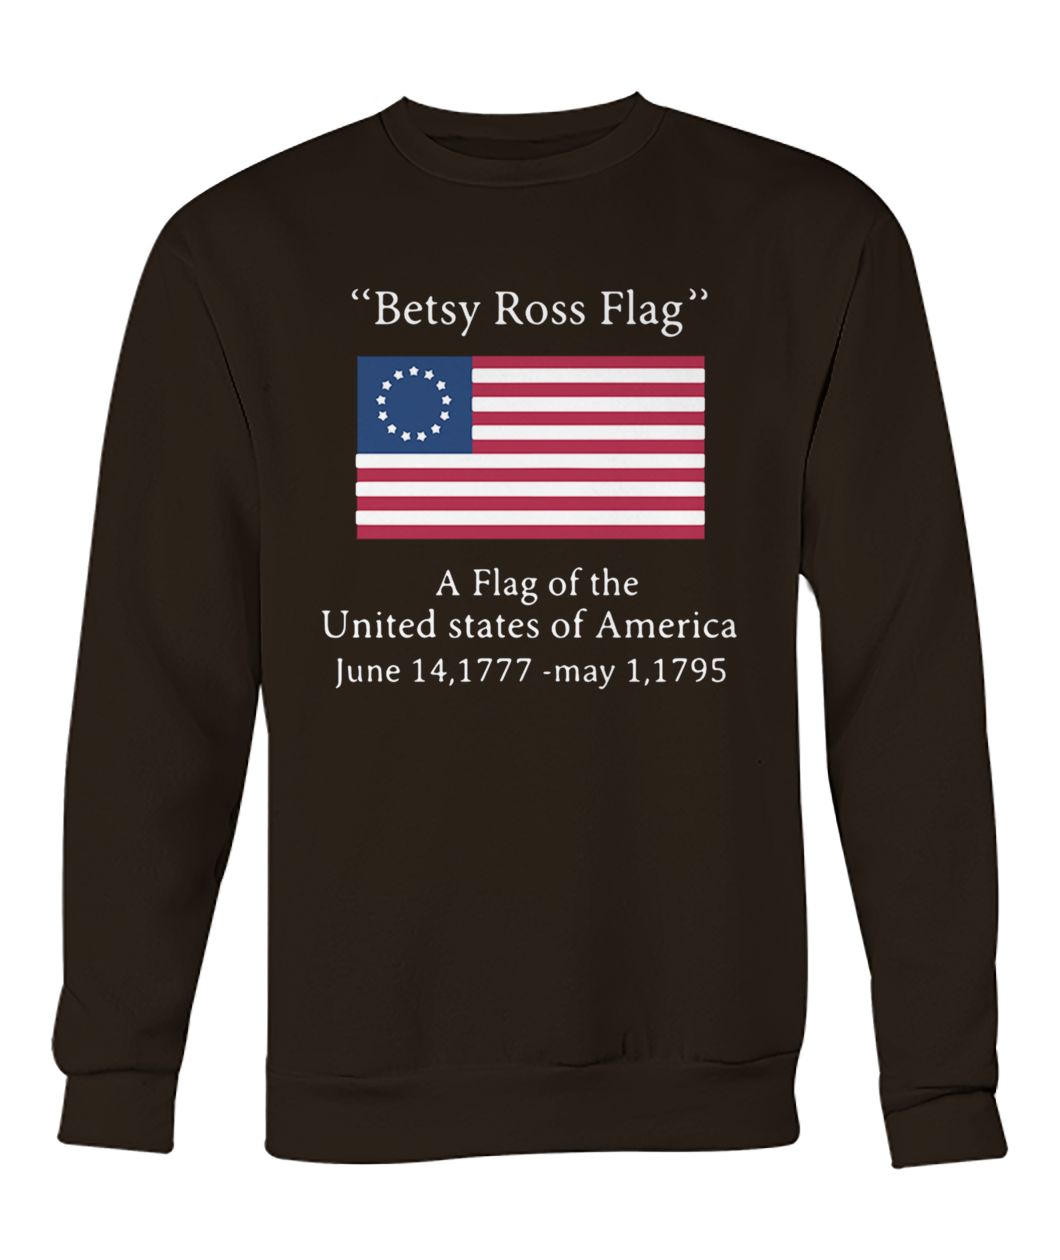 Betsy ross flag a flag of the united states of america crew neck sweatshirt